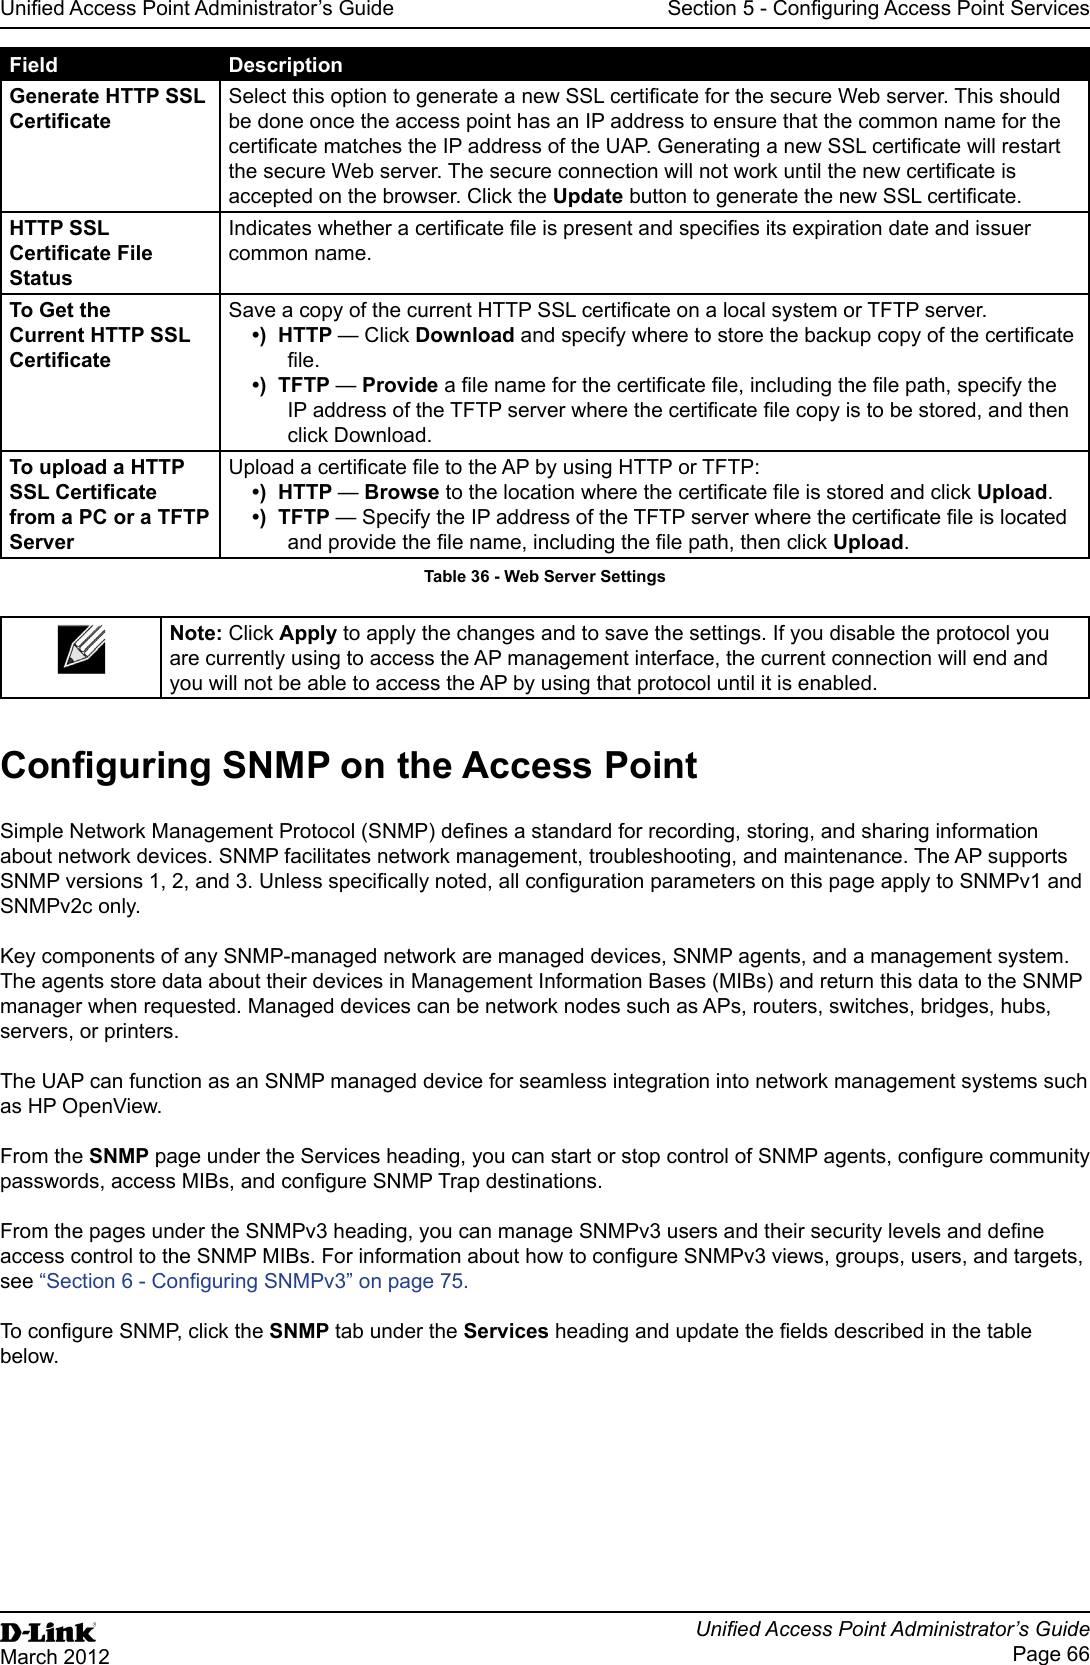 Unied Access Point Administrator’s GuideUnied Access Point Administrator’s GuidePage 66March 2012Section 5 - Conguring Access Point ServicesField DescriptionGenerate HTTP SSL CerticateSelect this option to generate a new SSL certicate for the secure Web server. This should be done once the access point has an IP address to ensure that the common name for the certicate matches the IP address of the UAP. Generating a new SSL certicate will restart the secure Web server. The secure connection will not work until the new certicate is accepted on the browser. Click the Update button to generate the new SSL certicate.HTTP SSL Certicate File StatusIndicates whether a certicate le is present and species its expiration date and issuer common name.To Get the Current HTTP SSL CerticateSave a copy of the current HTTP SSL certicate on a local system or TFTP server. •)  HTTP — Click Download and specify where to store the backup copy of the certicate le.•)  TFTP — Provide a le name for the certicate le, including the le path, specify the IP address of the TFTP server where the certicate le copy is to be stored, and then click Download.To upload a HTTP SSL Certicate from a PC or a TFTP ServerUpload a certicate le to the AP by using HTTP or TFTP:•)  HTTP — Browse to the location where the certicate le is stored and click Upload. •)  TFTP — Specify the IP address of the TFTP server where the certicate le is located and provide the le name, including the le path, then click Upload.Table 36 - Web Server SettingsNote: Click Apply to apply the changes and to save the settings. If you disable the protocol you are currently using to access the AP management interface, the current connection will end and you will not be able to access the AP by using that protocol until it is enabled.Conguring SNMP on the Access PointSimple Network Management Protocol (SNMP) denes a standard for recording, storing, and sharing information about network devices. SNMP facilitates network management, troubleshooting, and maintenance. The AP supports SNMP versions 1, 2, and 3. Unless specically noted, all conguration parameters on this page apply to SNMPv1 and SNMPv2c only.Key components of any SNMP-managed network are managed devices, SNMP agents, and a management system. The agents store data about their devices in Management Information Bases (MIBs) and return this data to the SNMP manager when requested. Managed devices can be network nodes such as APs, routers, switches, bridges, hubs, servers, or printers.The UAP can function as an SNMP managed device for seamless integration into network management systems such as HP OpenView. From the SNMP page under the Services heading, you can start or stop control of SNMP agents, congure community passwords, access MIBs, and congure SNMP Trap destinations. From the pages under the SNMPv3 heading, you can manage SNMPv3 users and their security levels and dene access control to the SNMP MIBs. For information about how to congure SNMPv3 views, groups, users, and targets, see “Section 6 - Conguring SNMPv3” on page 75. To congure SNMP, click the SNMP tab under the Services heading and update the elds described in the table below.